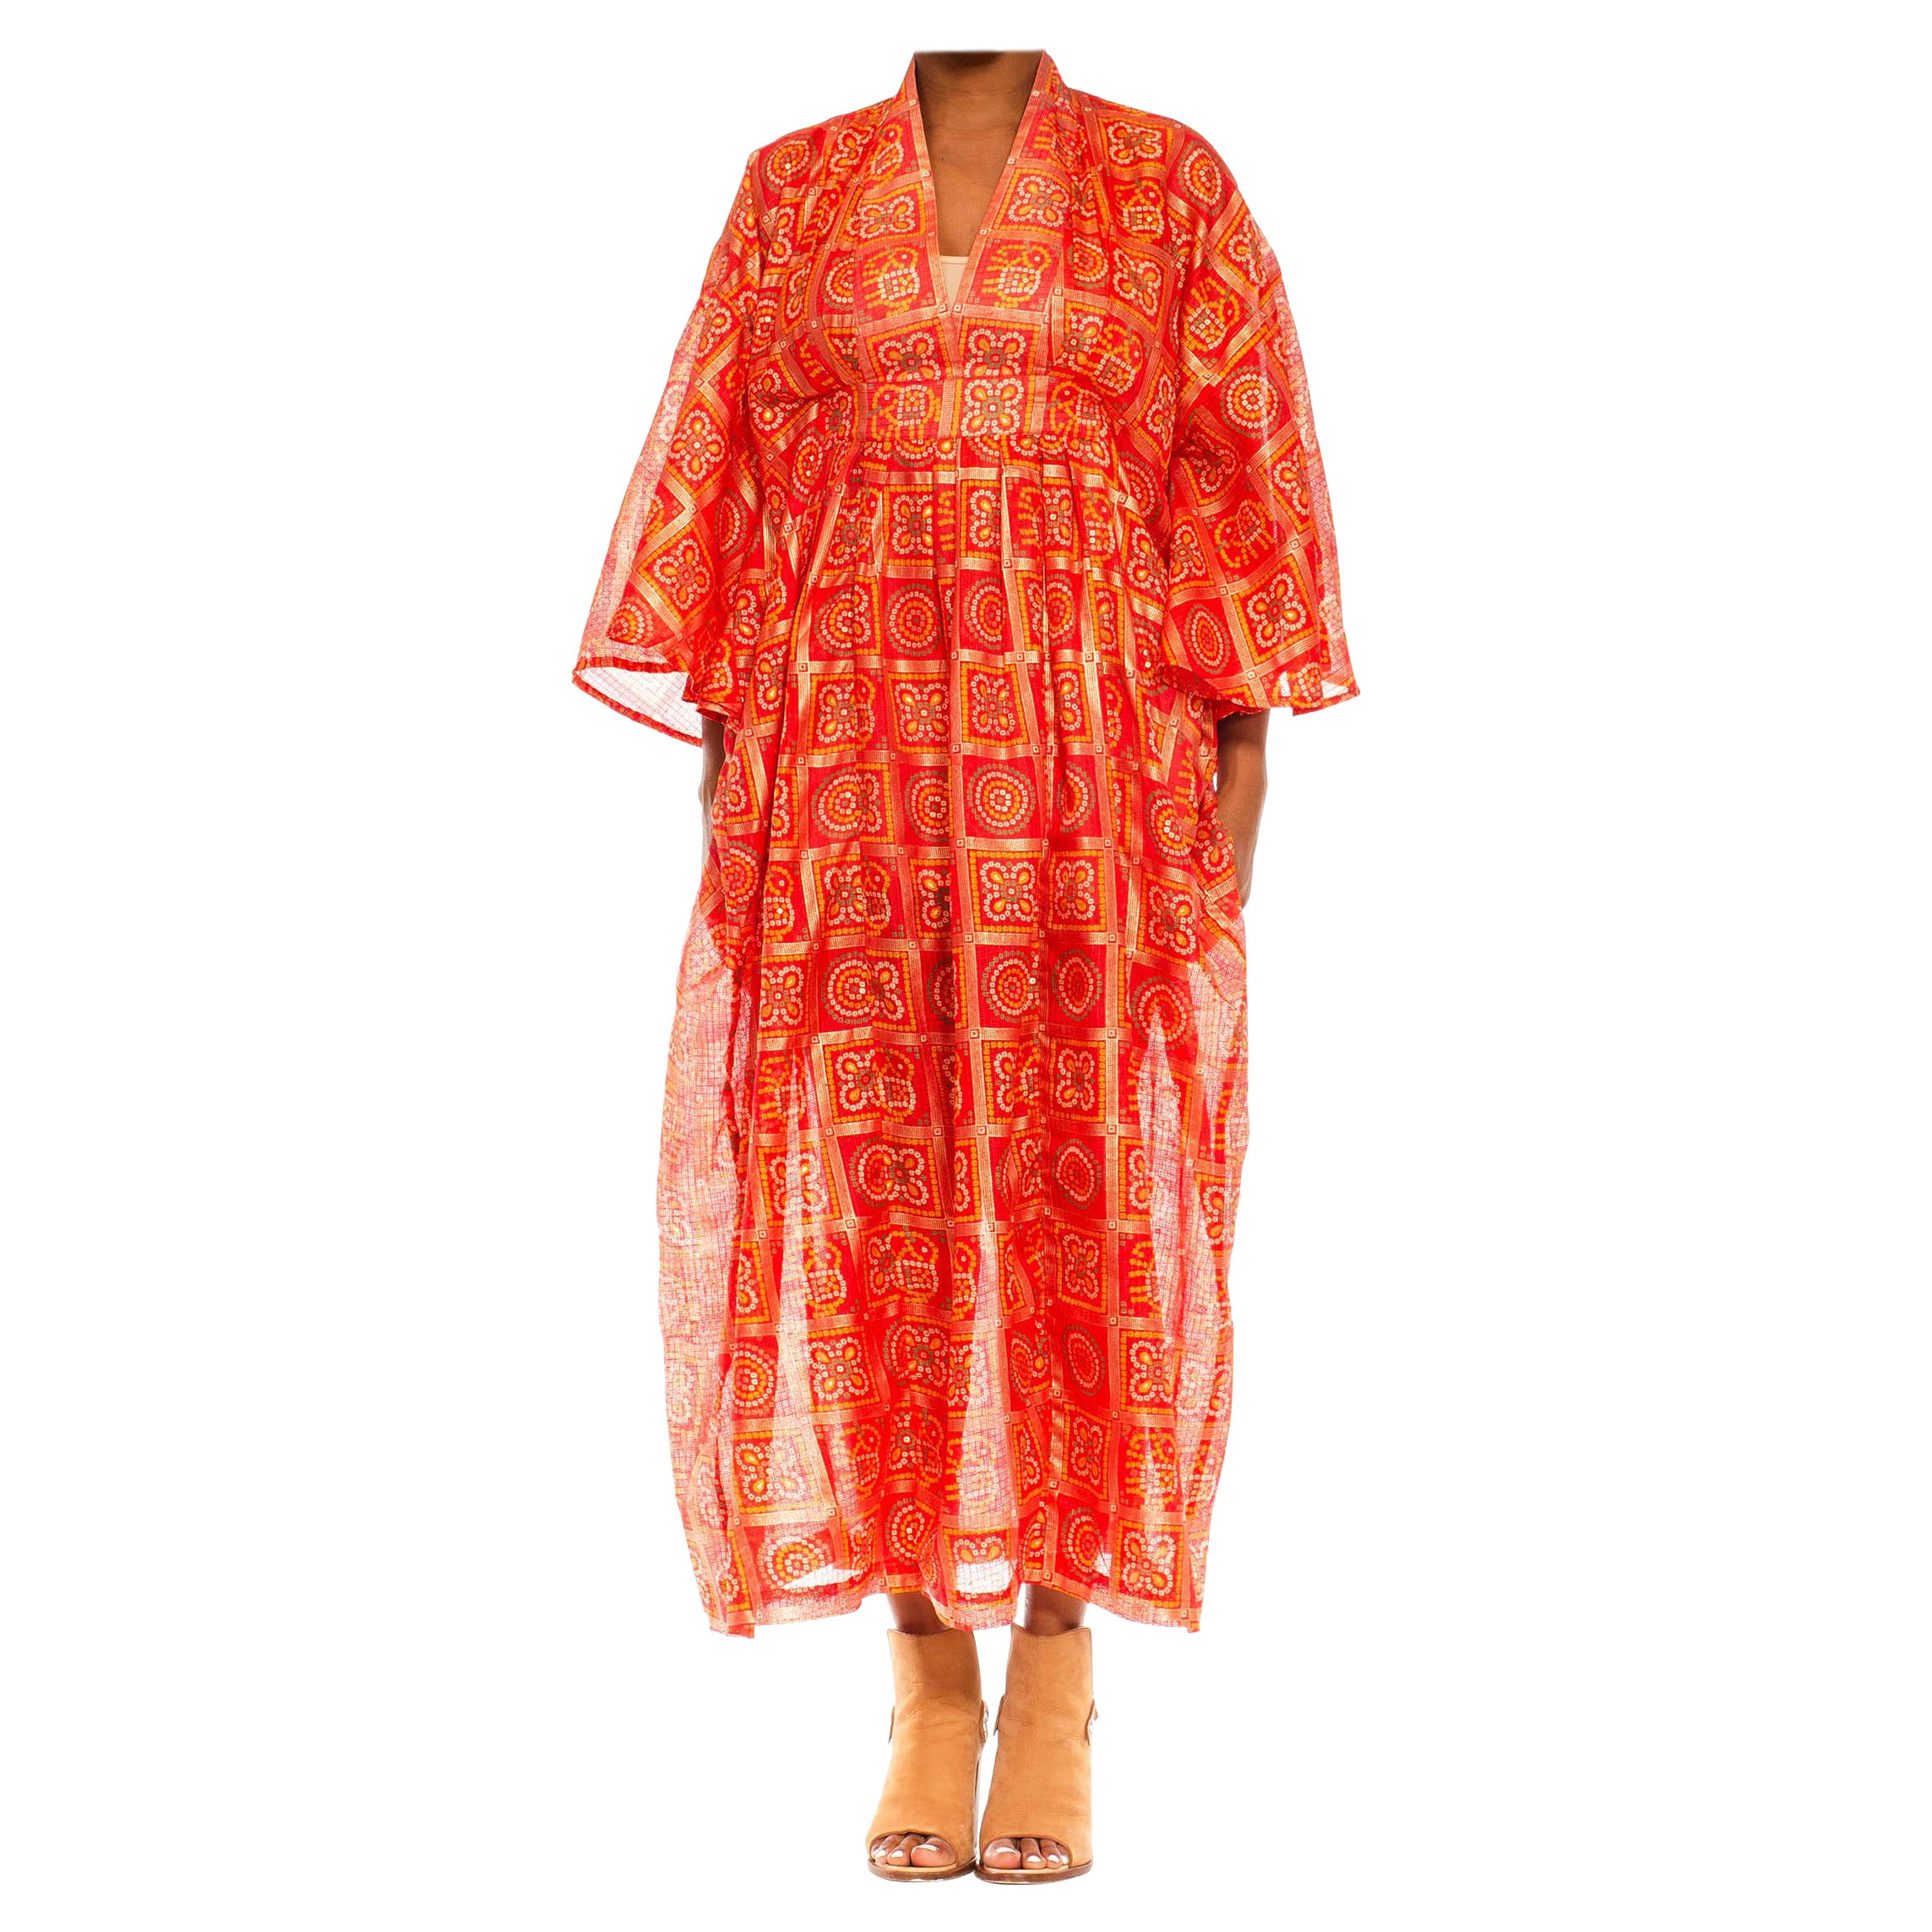 Morphew Collection Red & Gold Polyester Geometric Kaftan Made From Vintage Saris